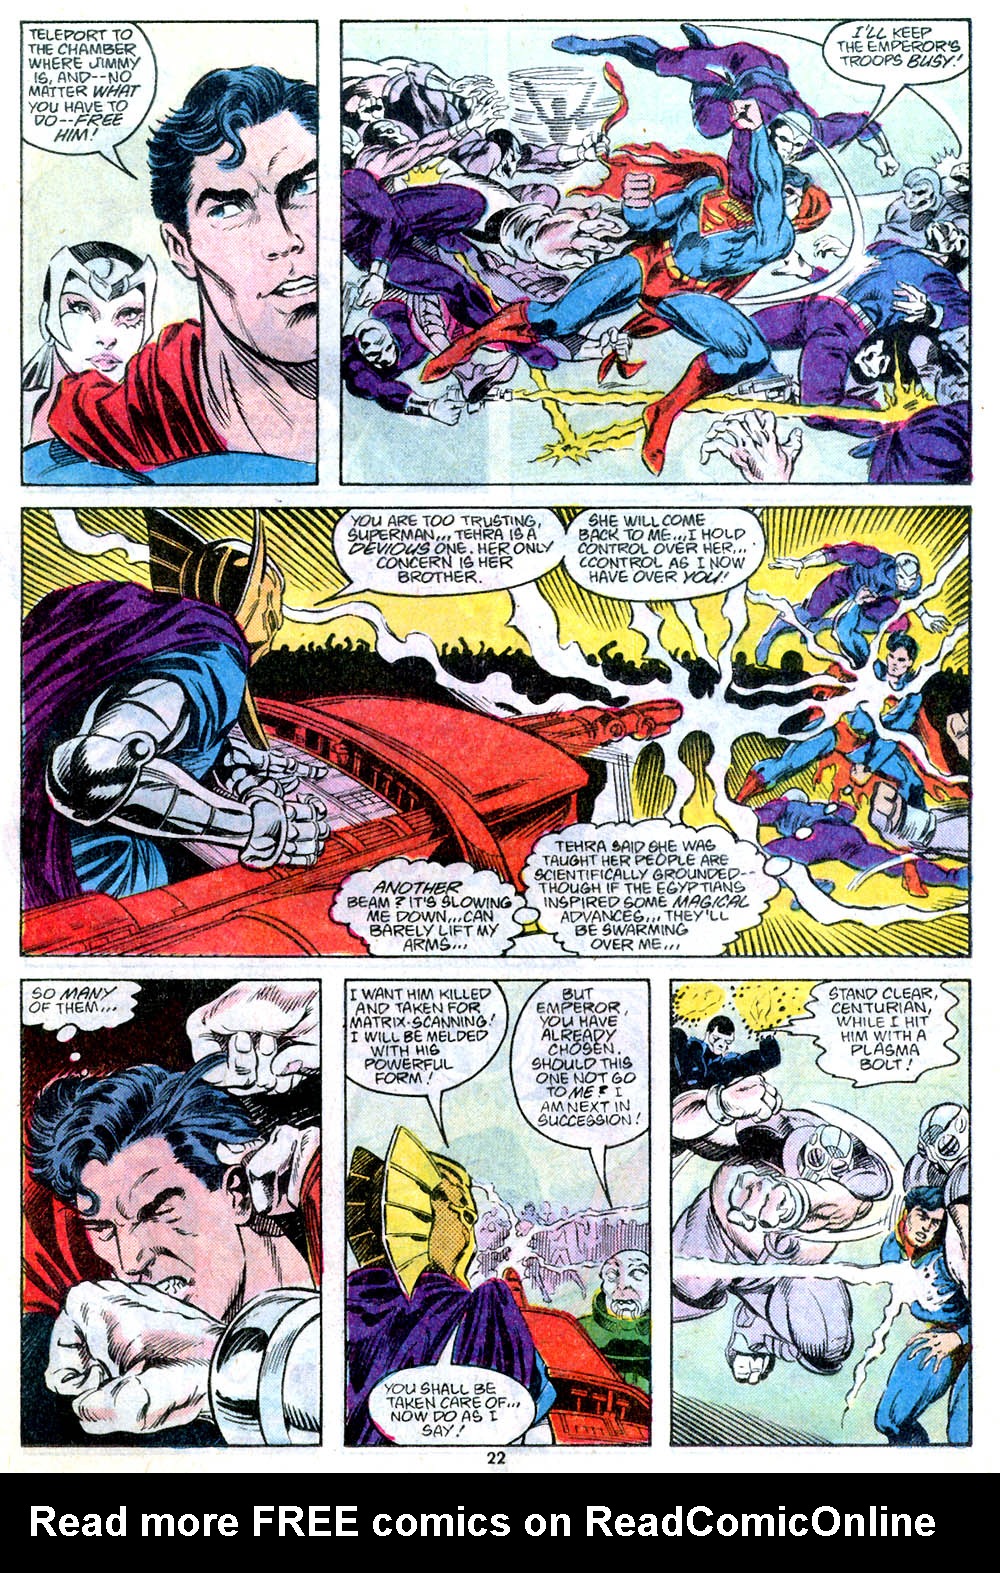 Adventures of Superman (1987) 443 Page 23